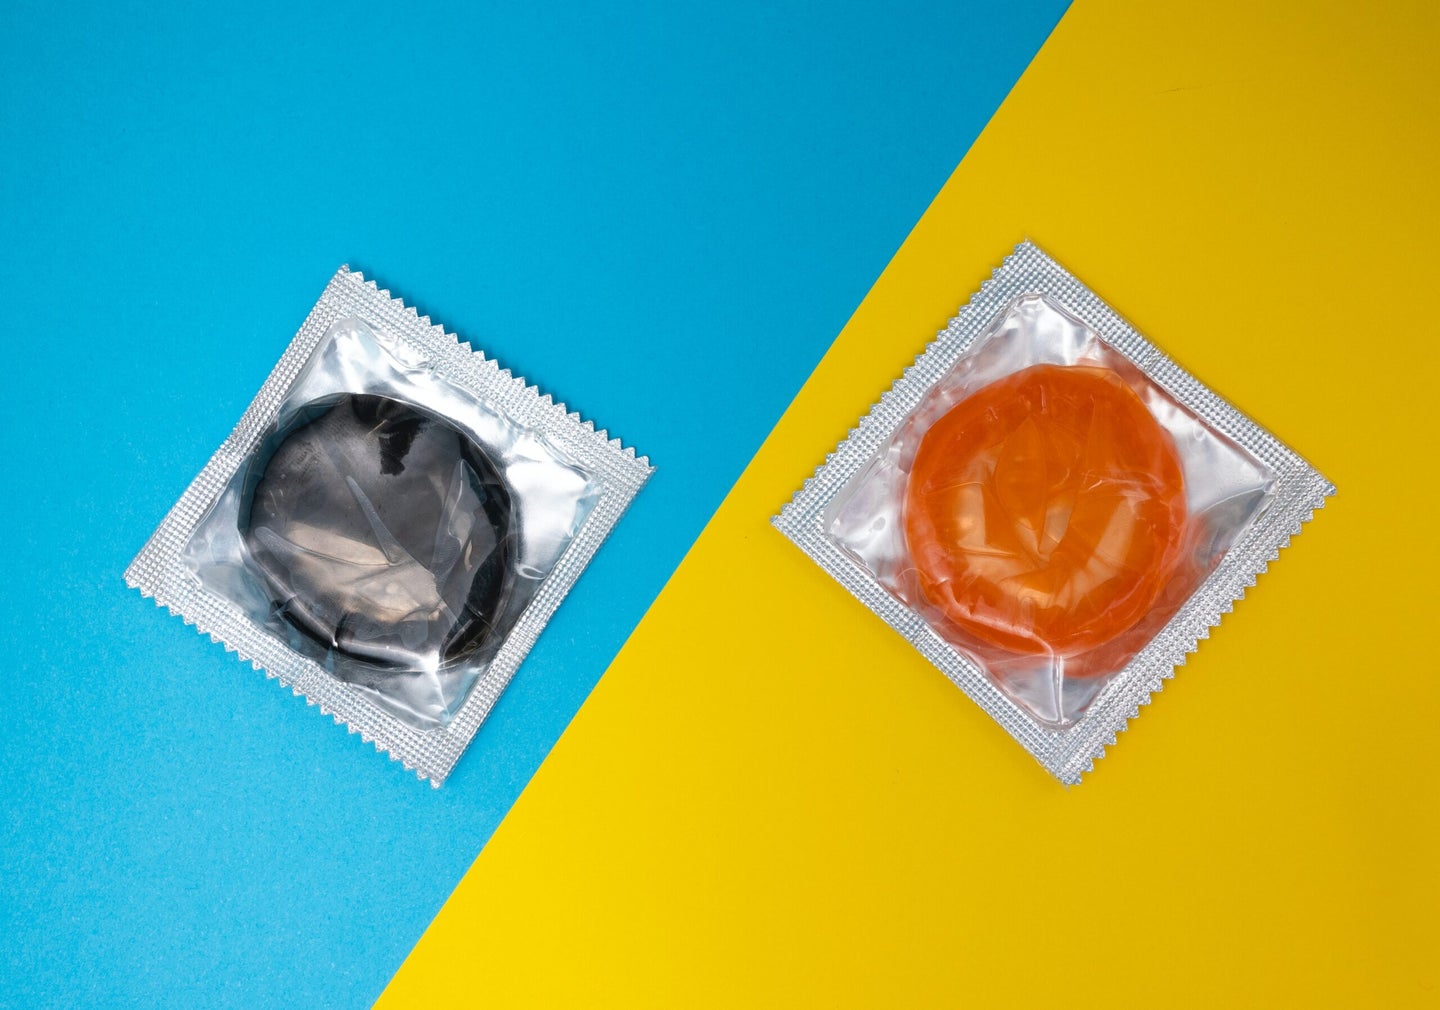 Two condoms on blue and yellow background.